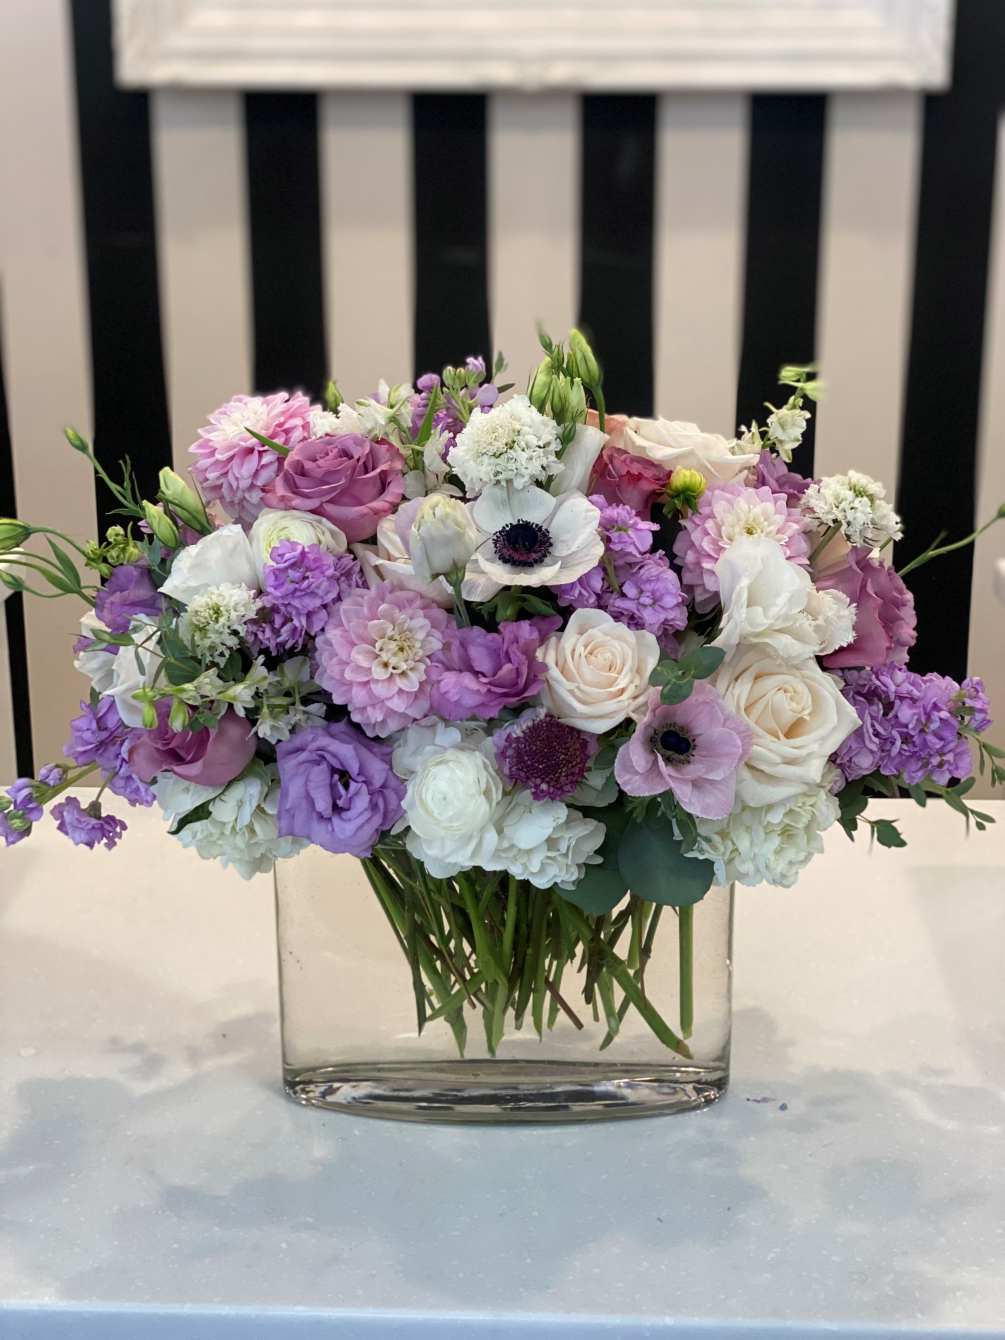 Beautiful, lush flower assortment with lavender and white premium flowers.